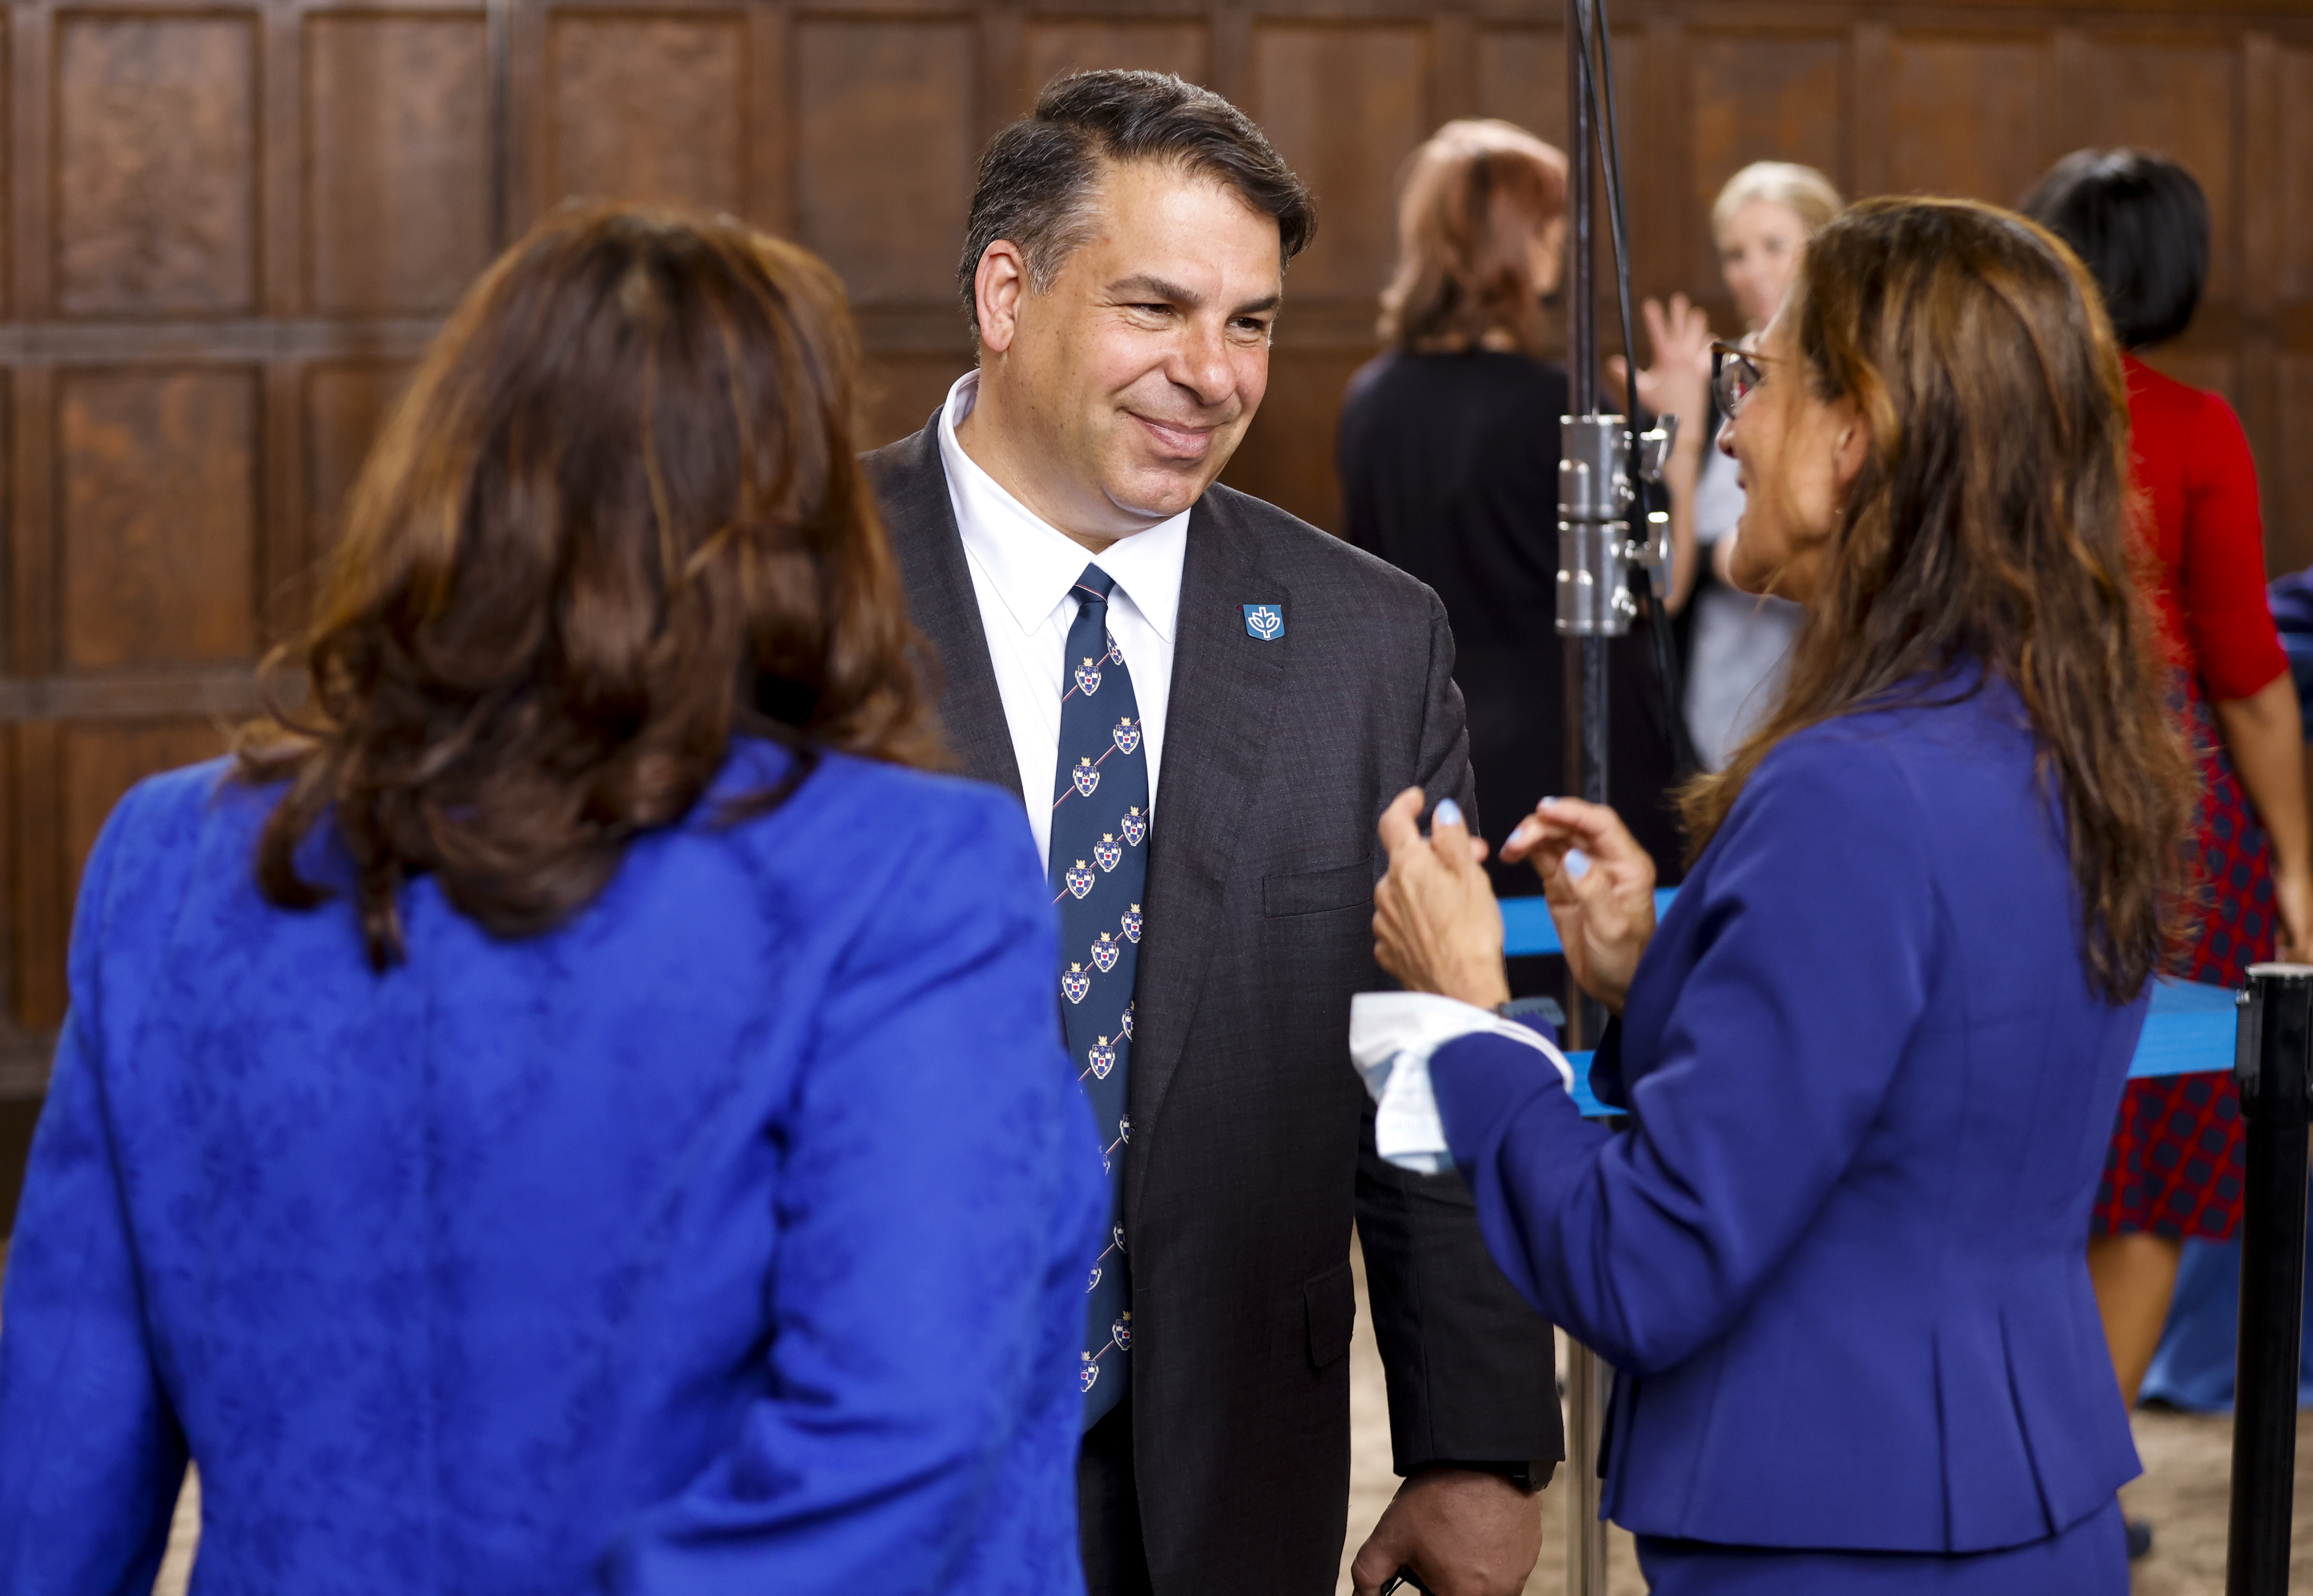 Trustees, faculty, staff and students welcomed Manuel and his family to the DePaul community at events hosted throughout the day. 